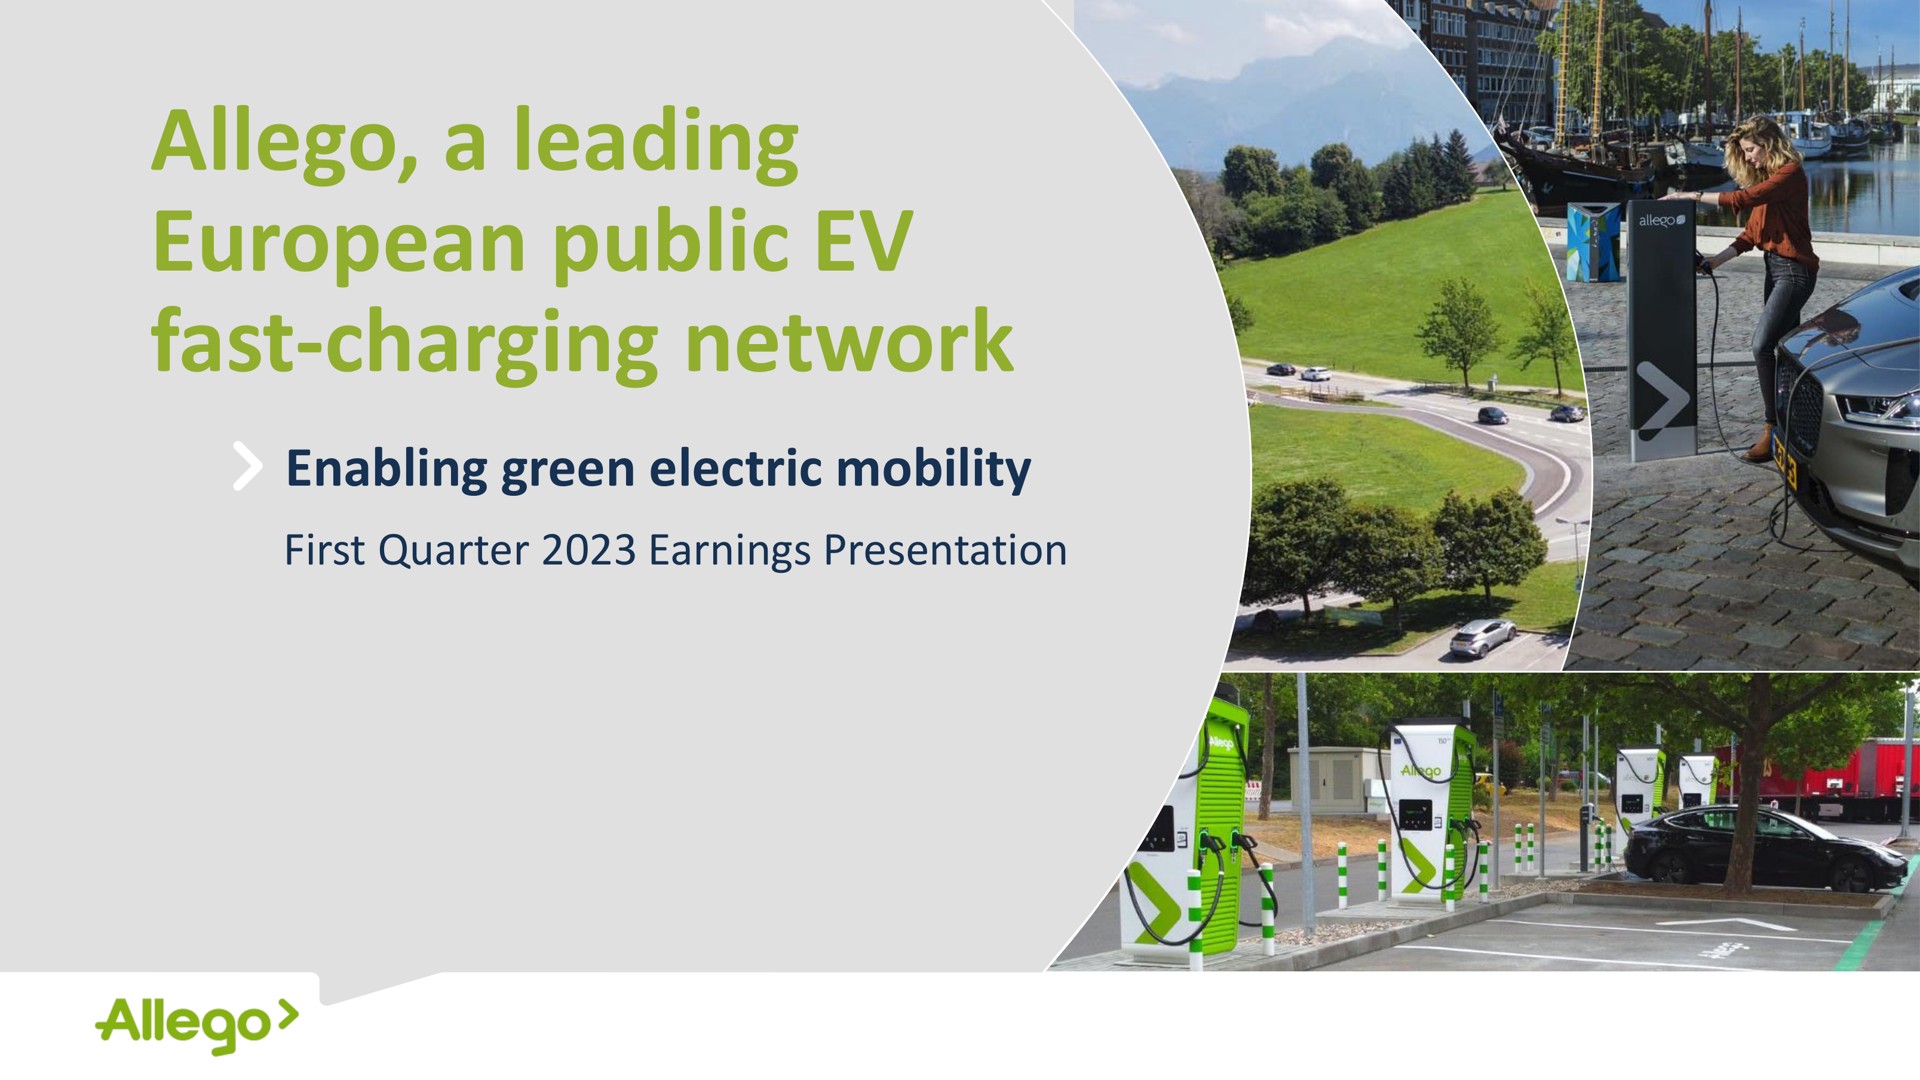 a leading public fast charging network enabling green electric mobility first quarter earnings presentation | Allego